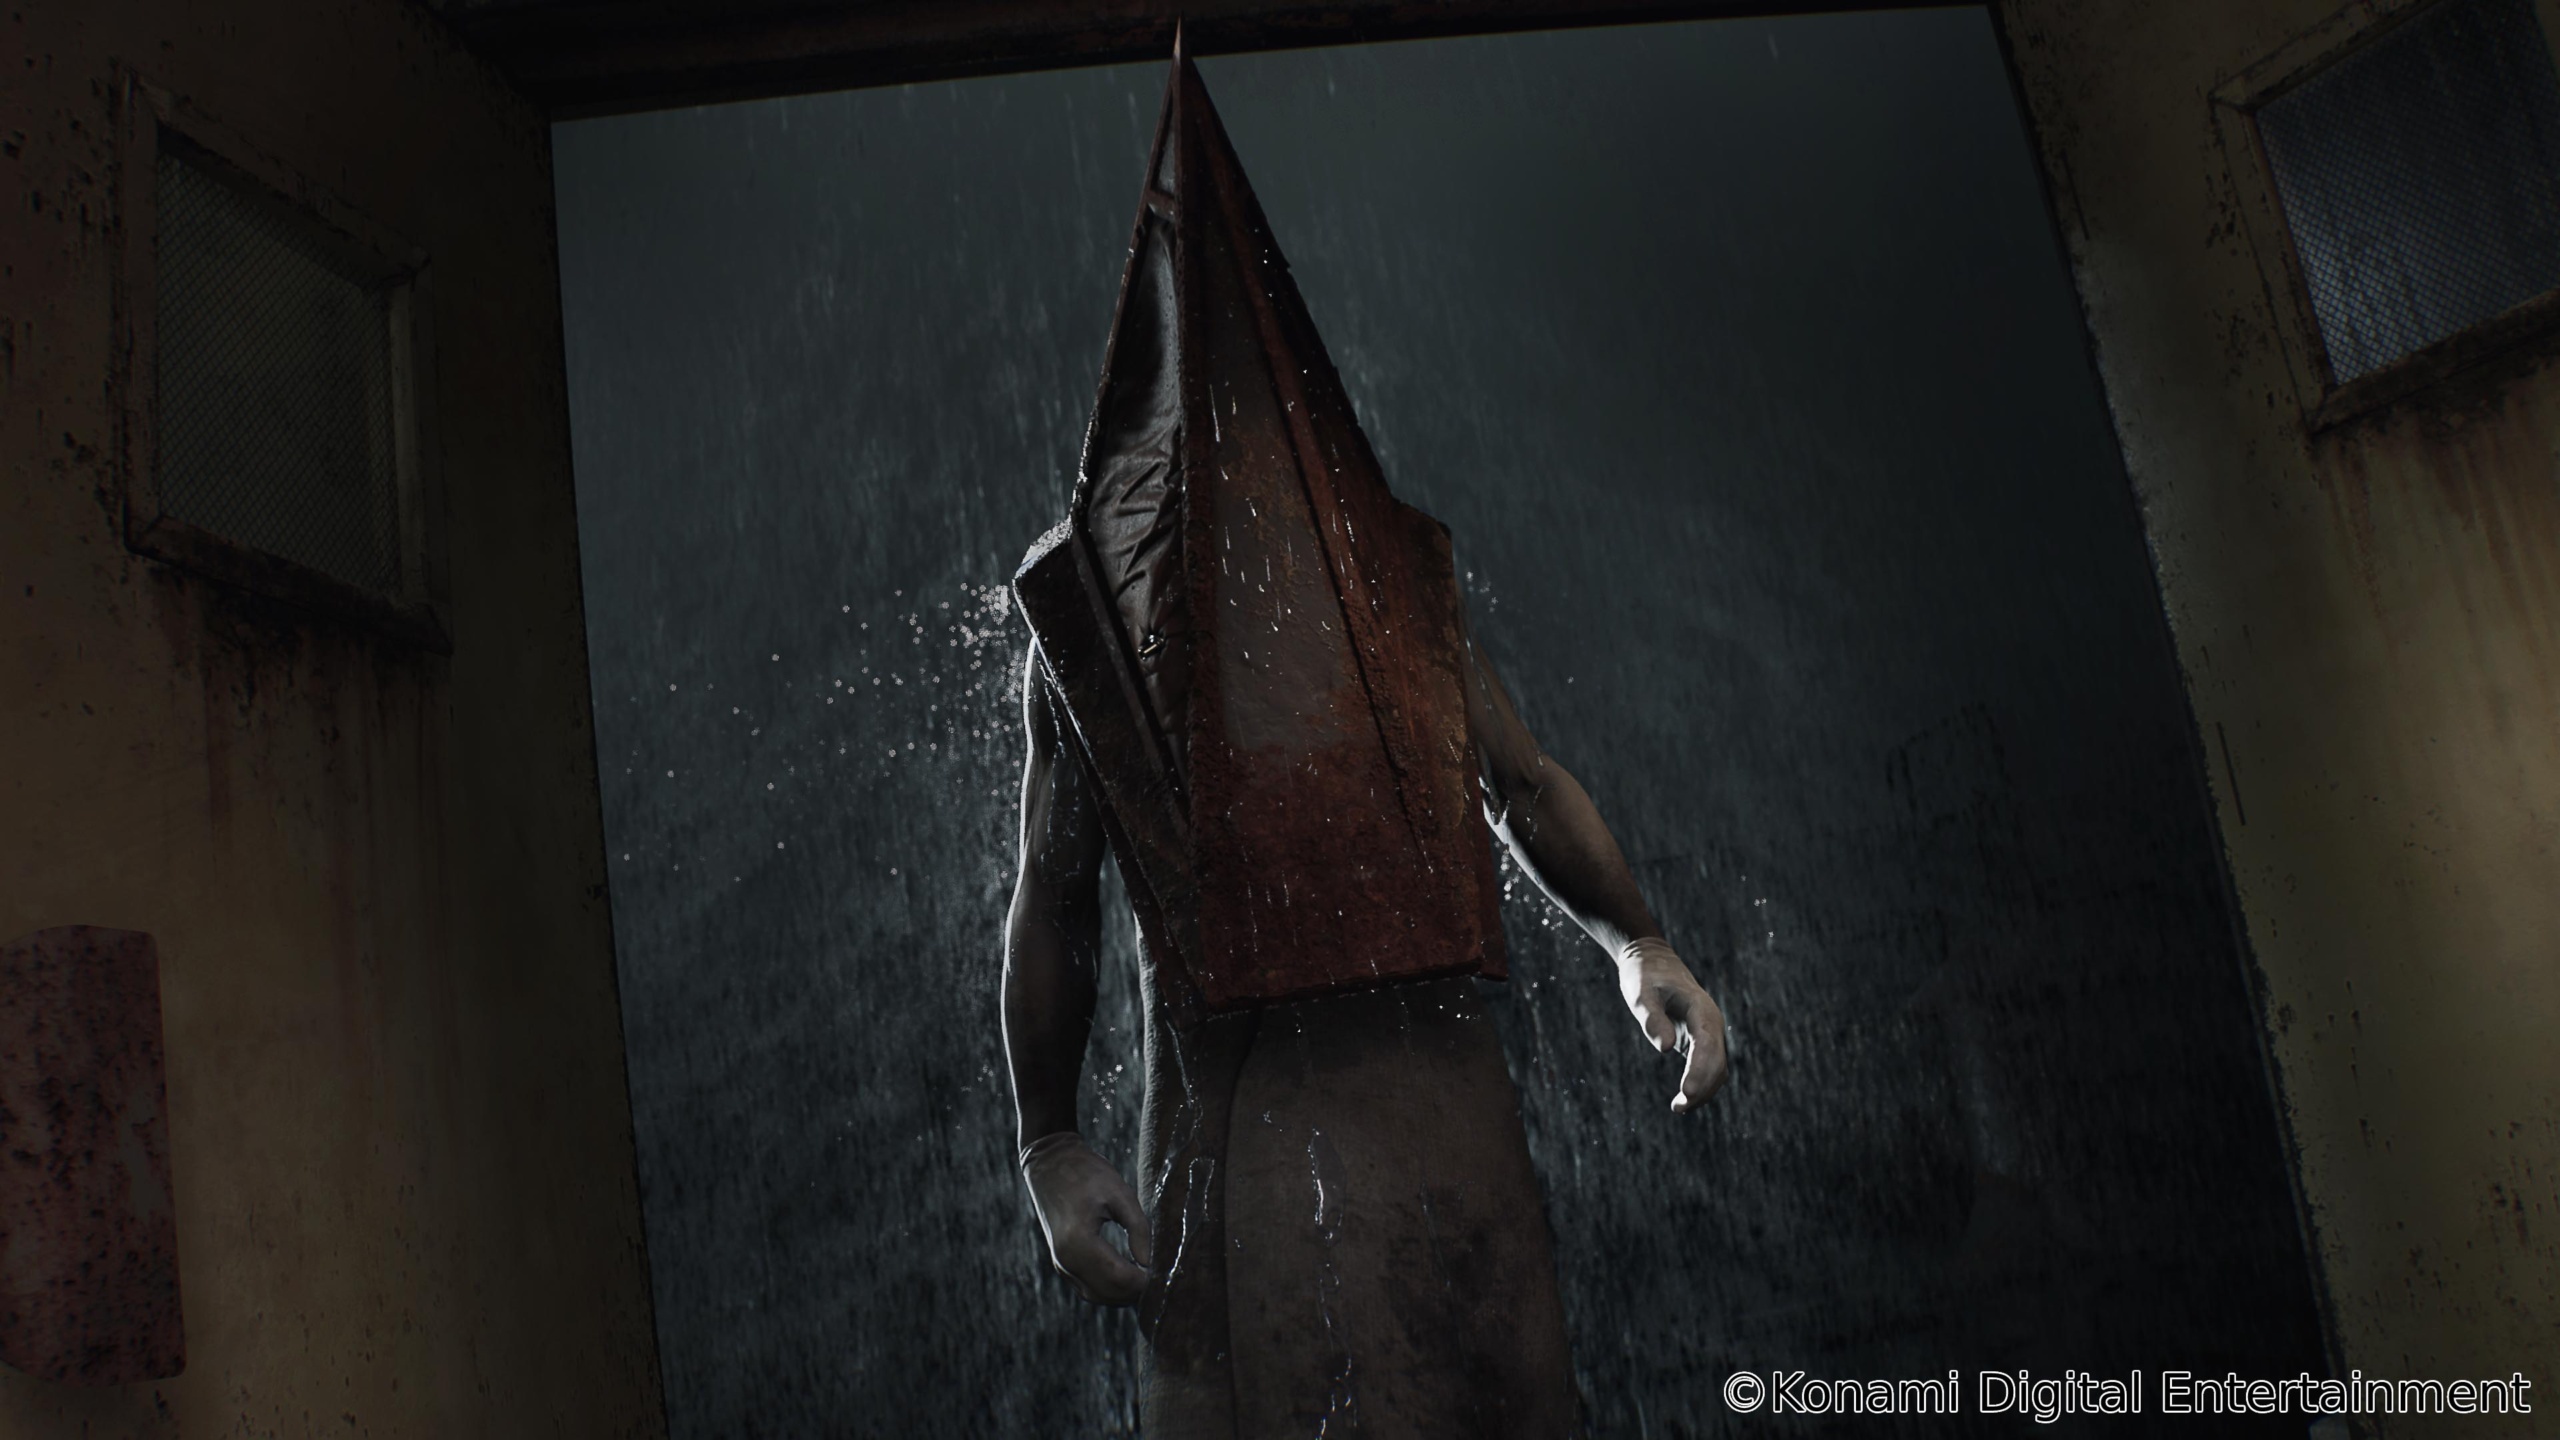 Silent Hill: The Short Message released for free on PS5, Silent Hill 2 remake still in development (combat trailer shown)